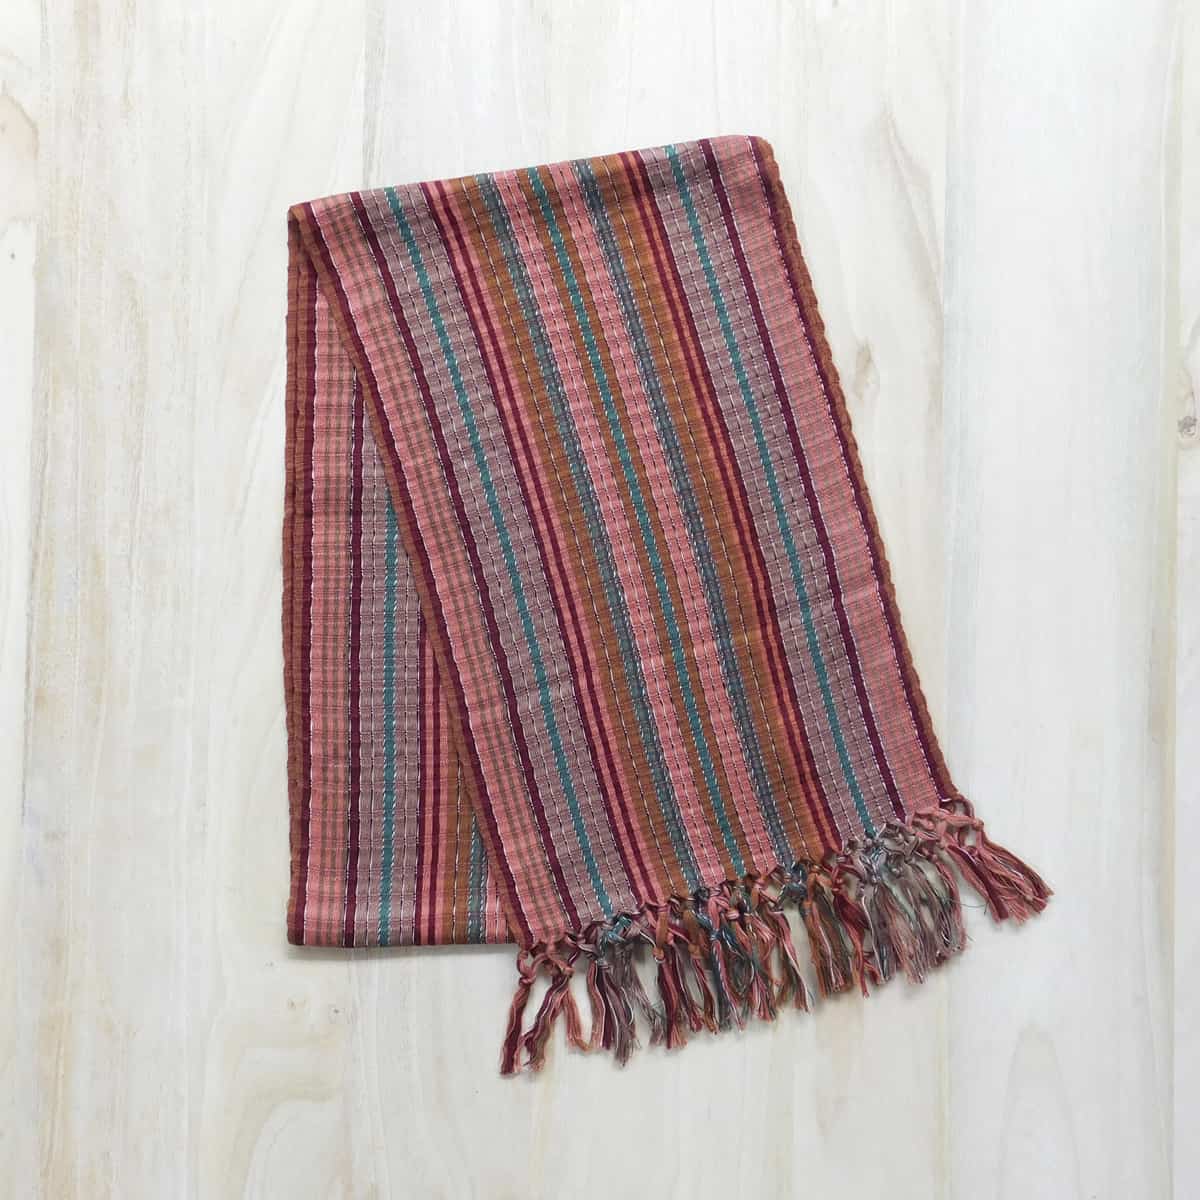 A handwoven scarf made in Guatemala with decorative fringe and earth-toned stripes.